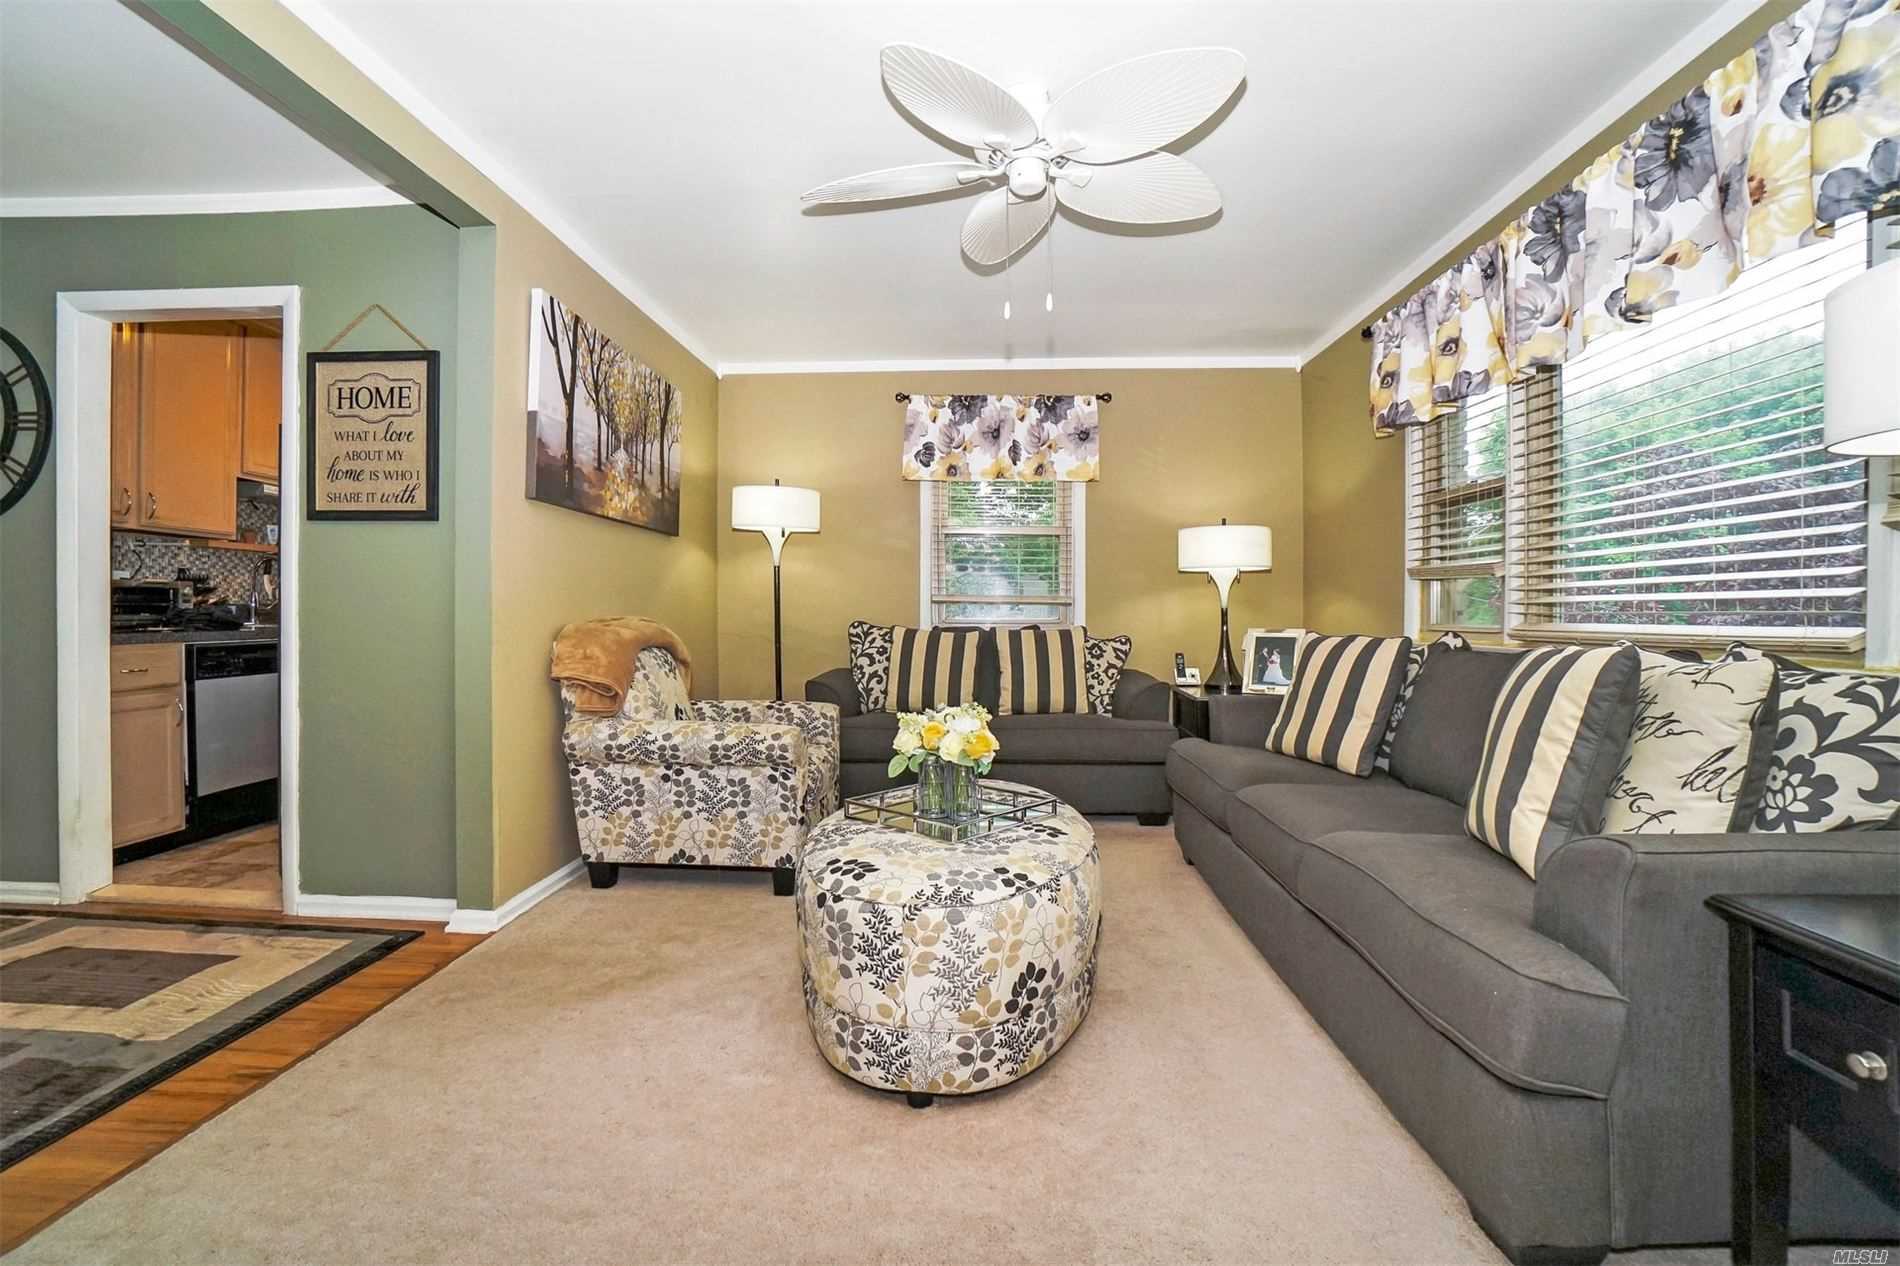 Beautiful Upper Unit 1 Bedroom, with updated kitchen, New Bathroom, Huge Custom Closet in Bedroom, Living room, Dining Room, and Deck, this unit comes with 2 parking spots. The Woodlands offers a pool, Laundry room and Rec Room! Maintenance of 903.88 includes taxes, common charges, heat, water, and sewer.